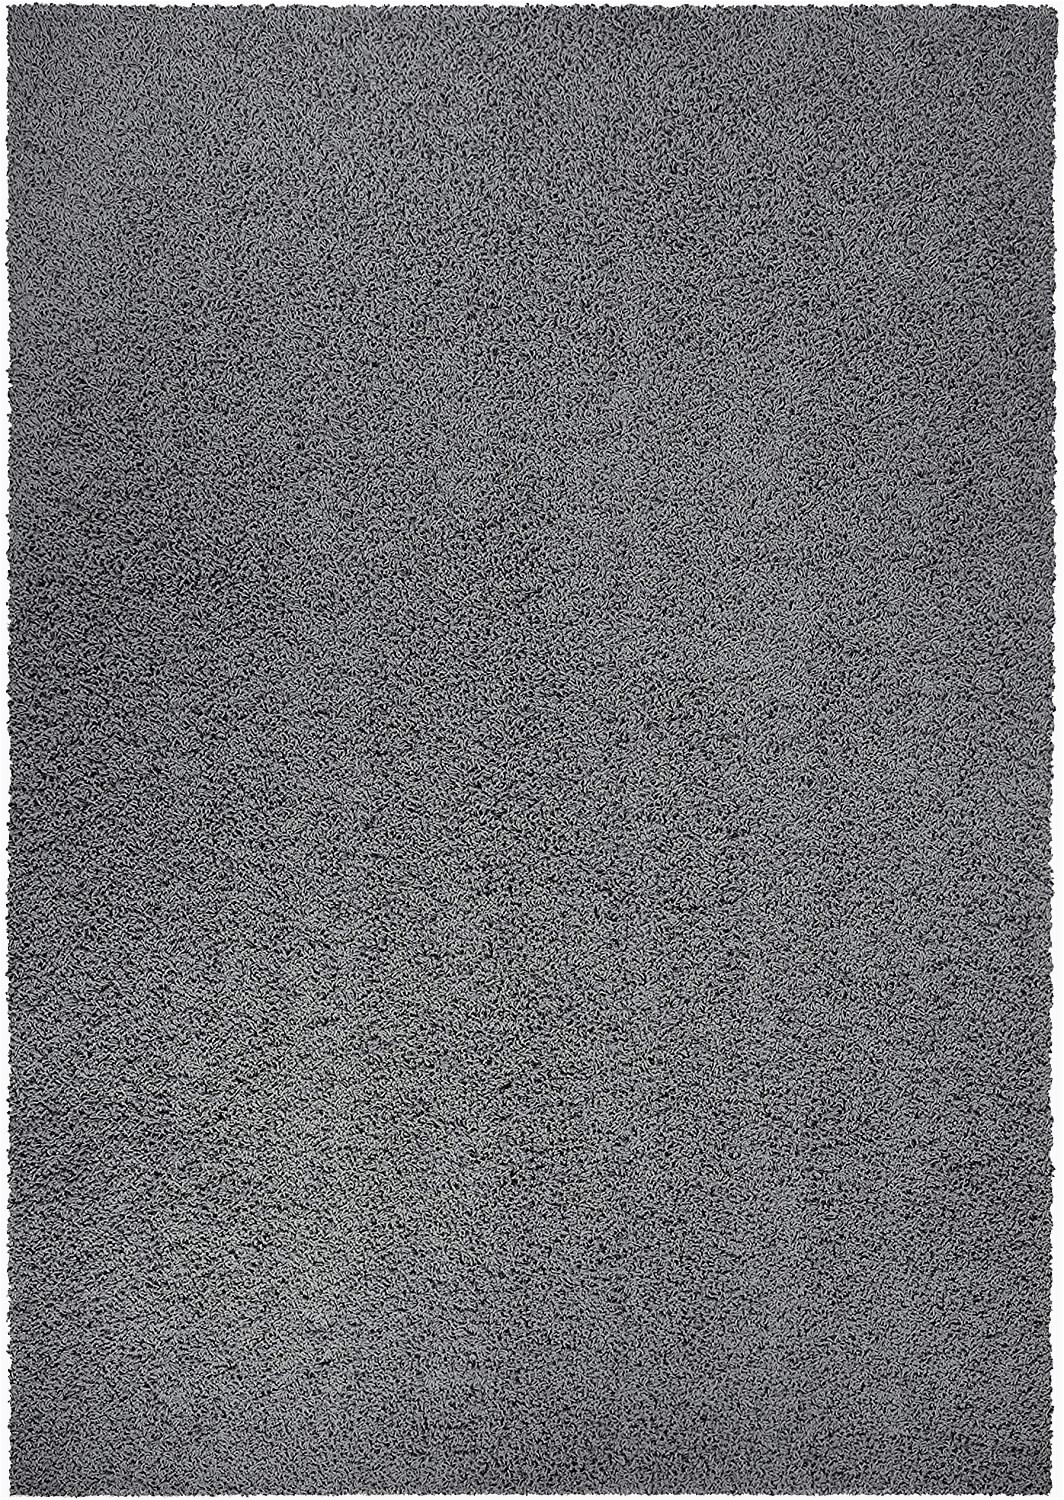 Mainstays Polyester solid Textured Shag area Rug and Runner Collection Amazon Mainstays Olefin Shag area Rug and Runner 7 X